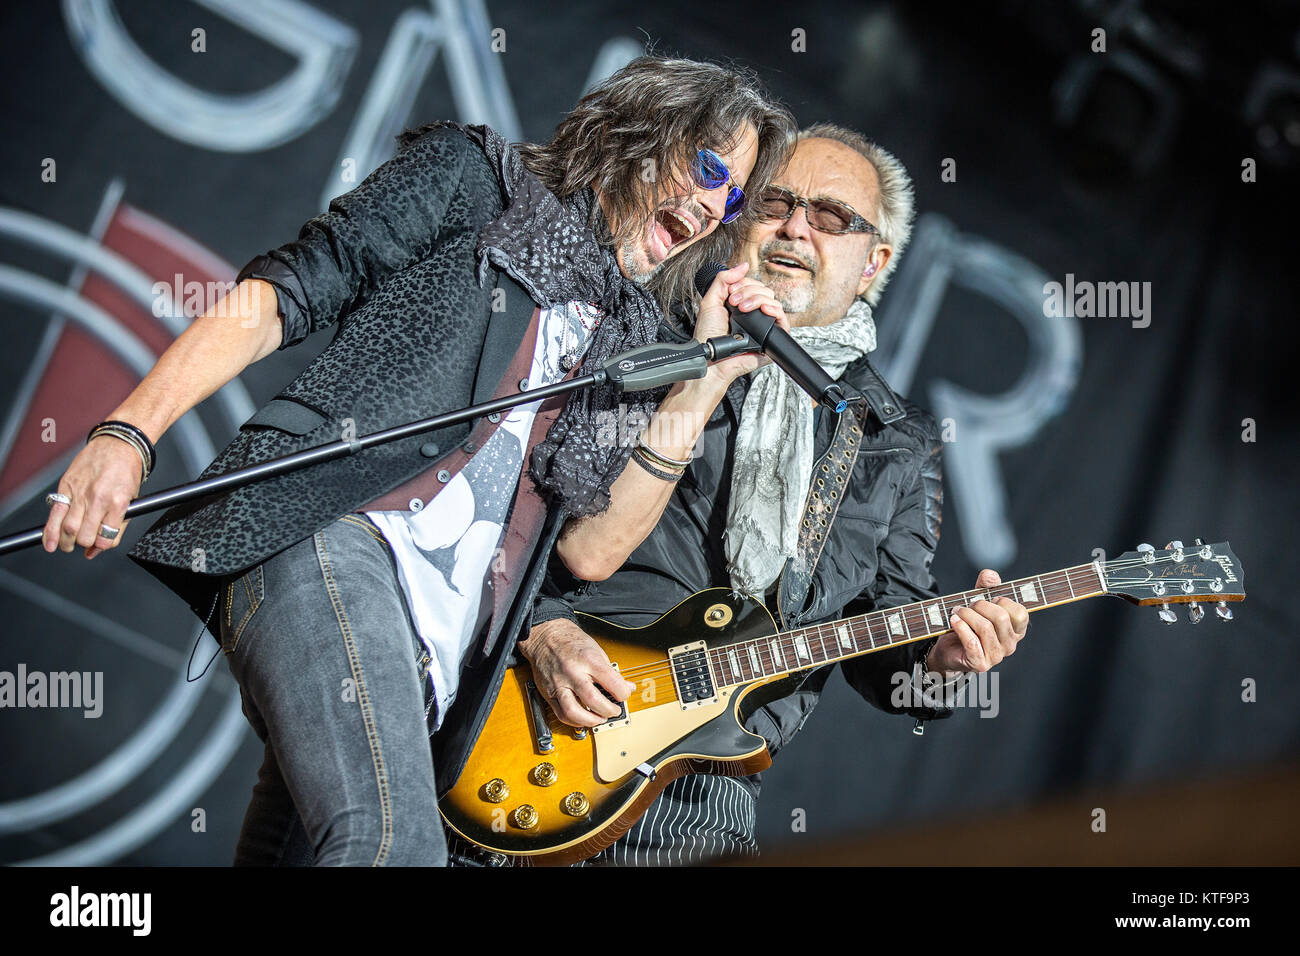 The British-American hard rock band Foreigner performs a live concert at the Sweden Rock Festival 2016. Here vocalist Kelly Hansen is seen live on stage with guitarist Mick Jones. Sweden, 10/06 2016. Stock Photo